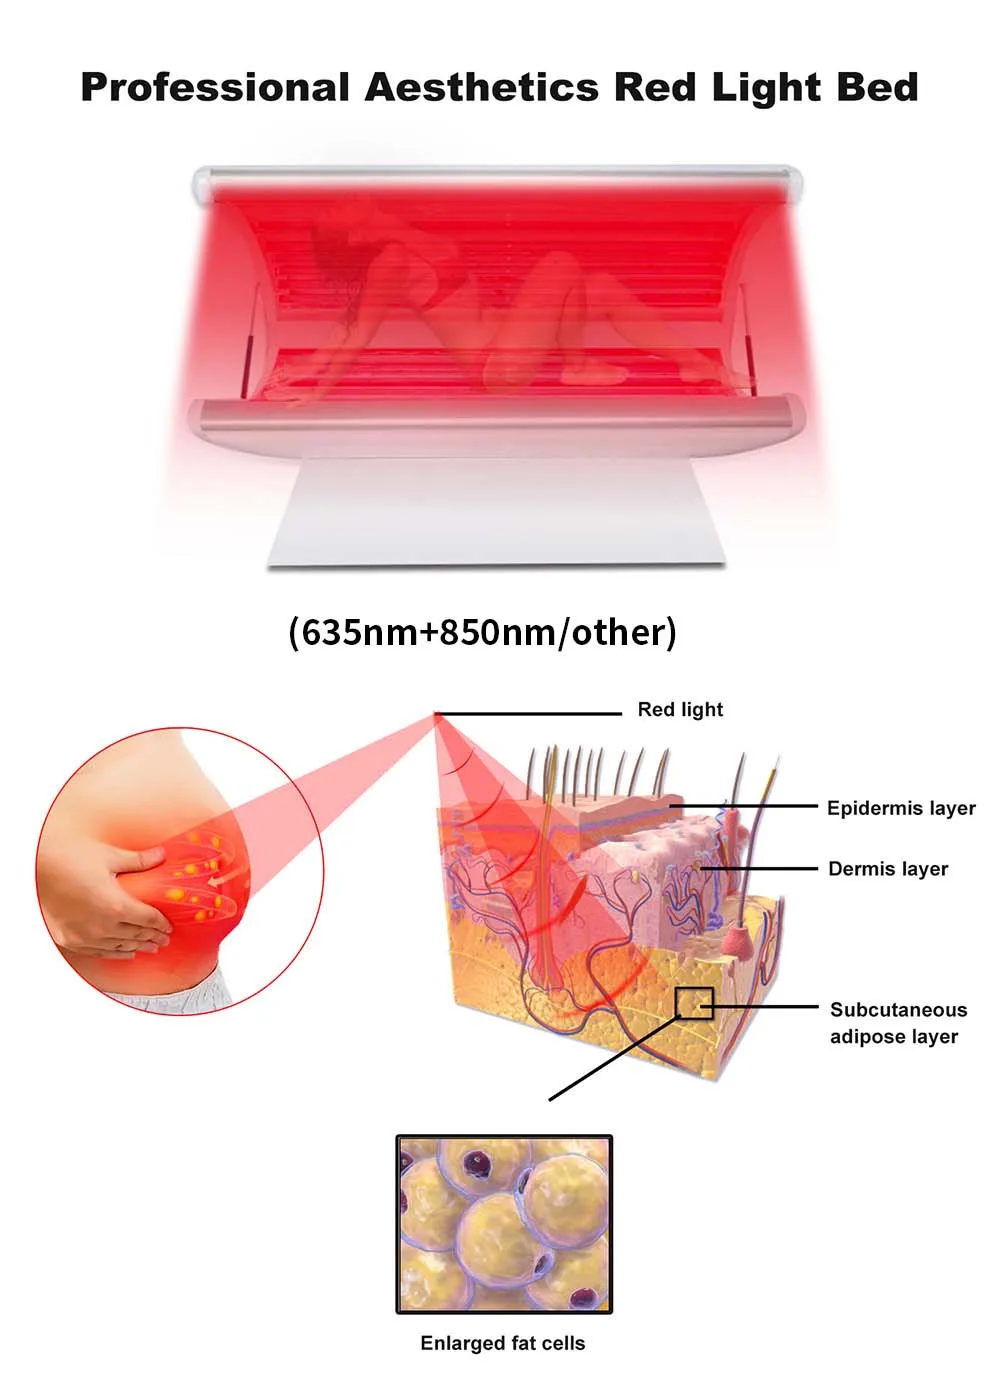 SSCH/Suyzeko PDT Skin Beauty Capsule Infrared Red Light Therapy Led Photon Beds Hot Sale